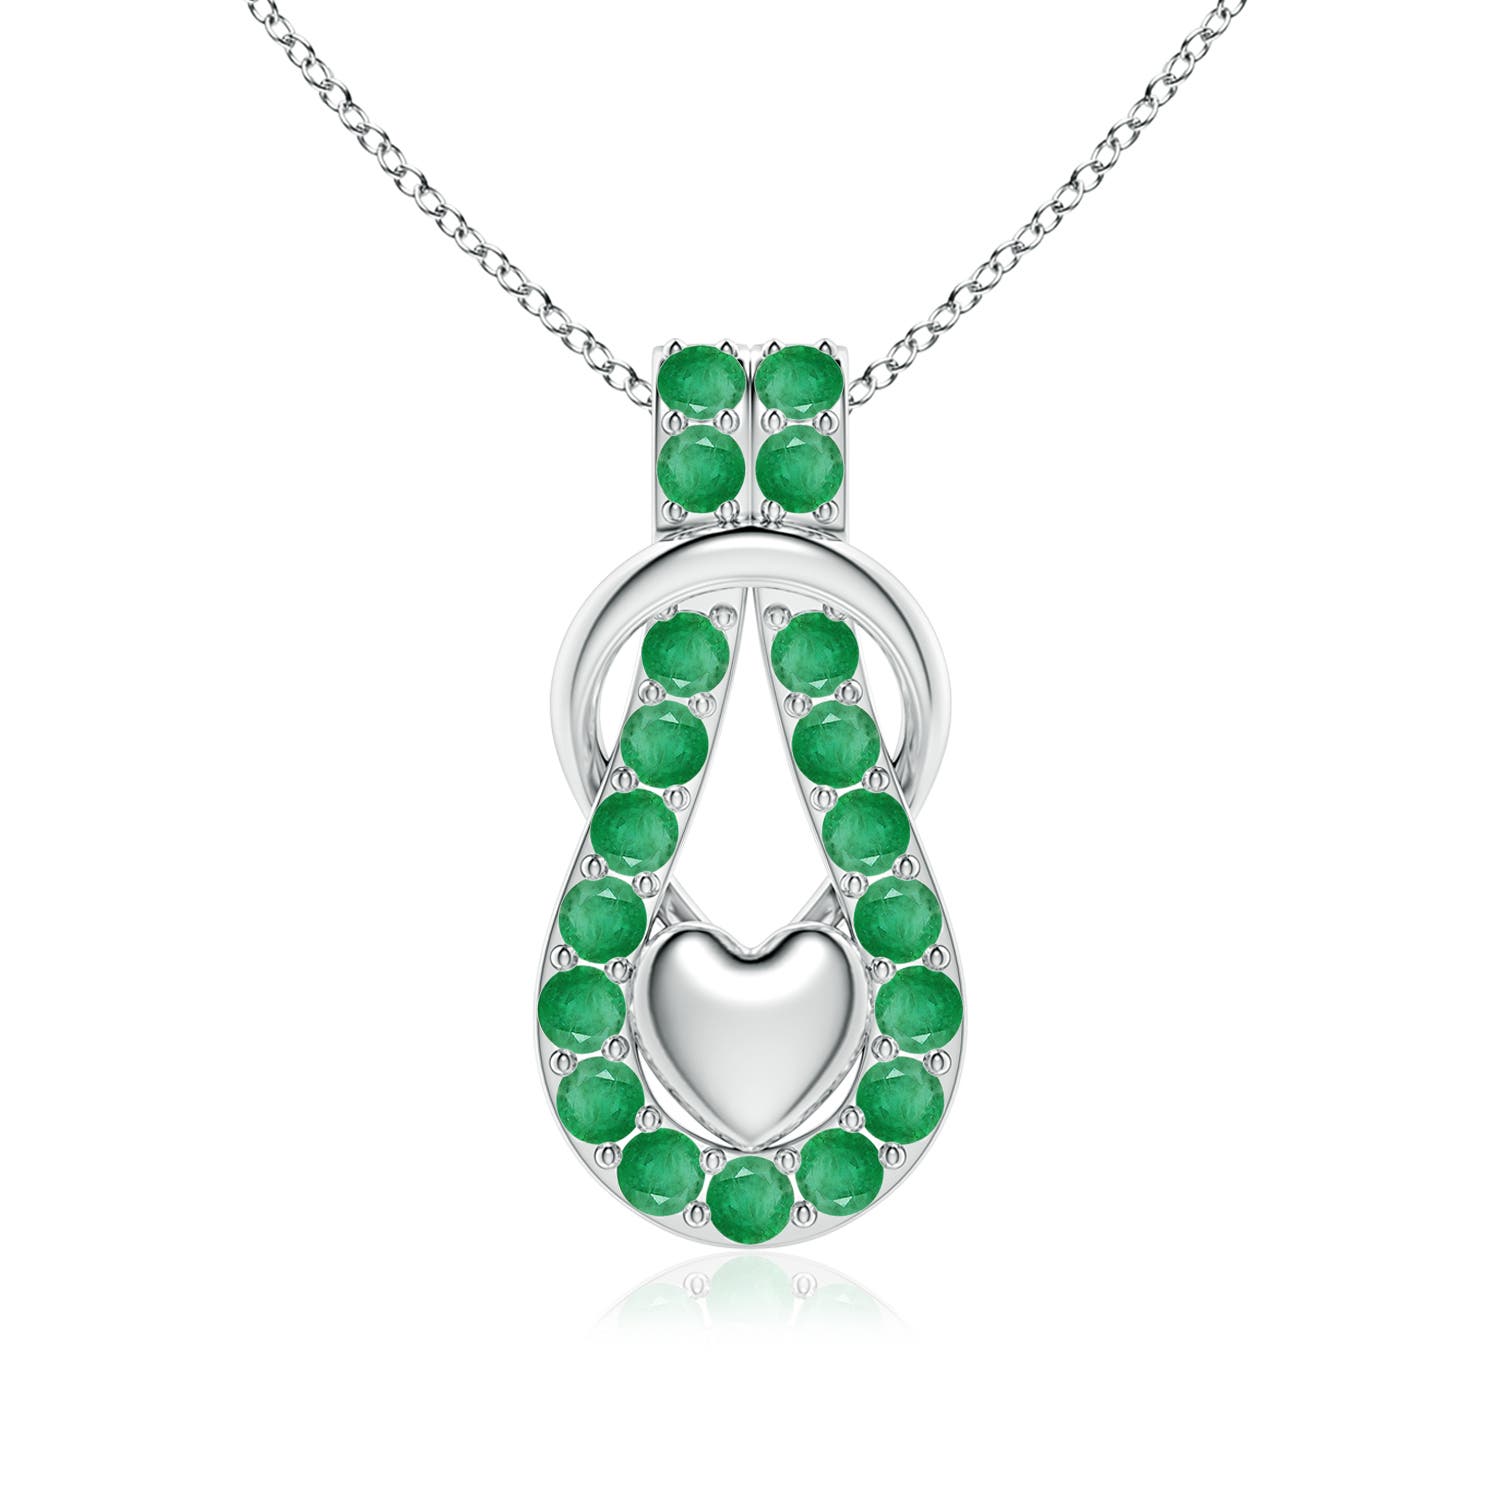 A - Emerald / 1.9 CT / 18 KT White Gold